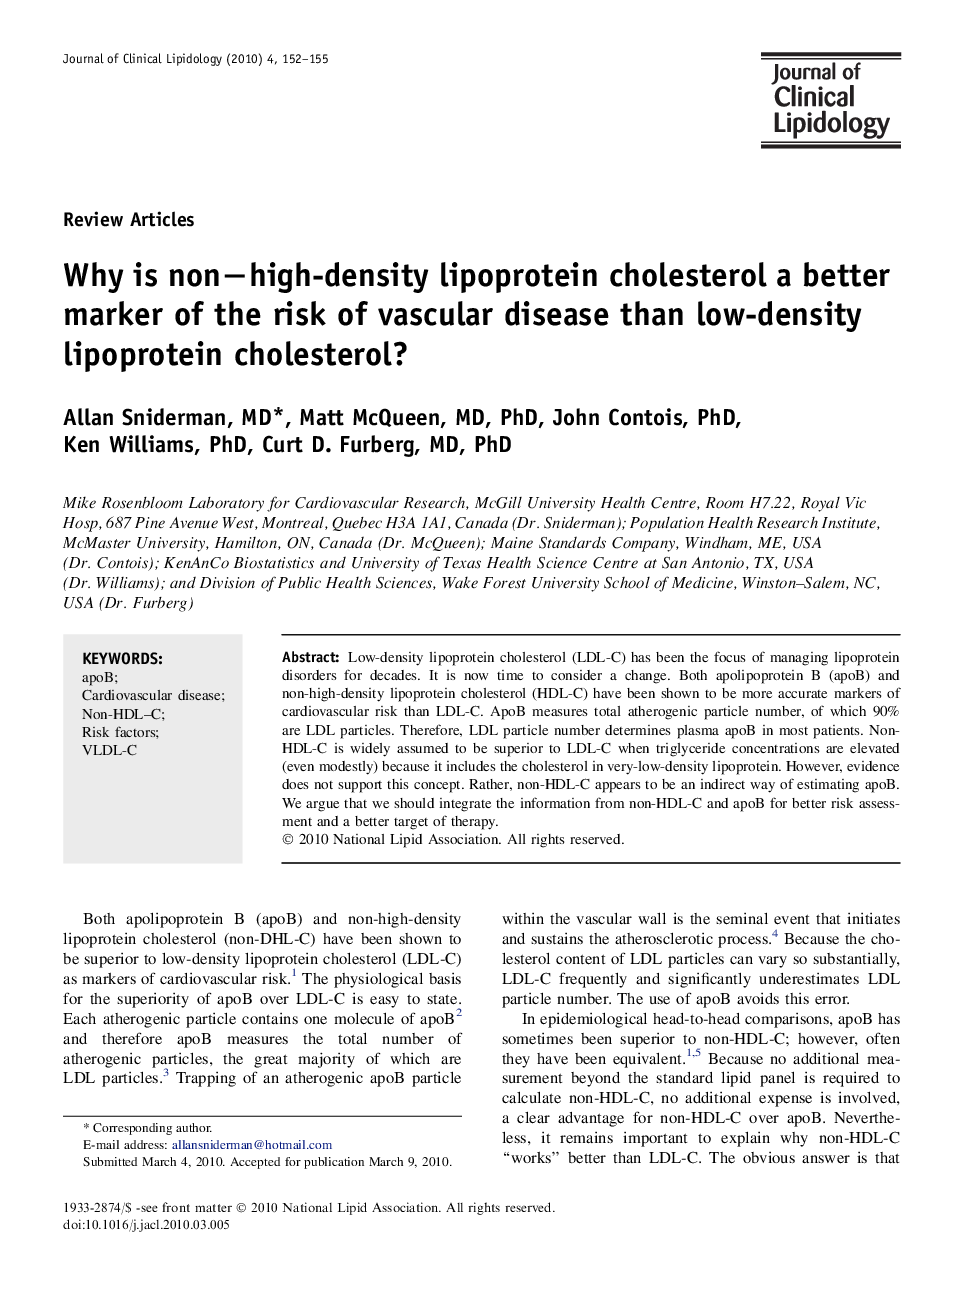 Why is non−high-density lipoprotein cholesterol a better marker of the risk of vascular disease than low-density lipoprotein cholesterol?